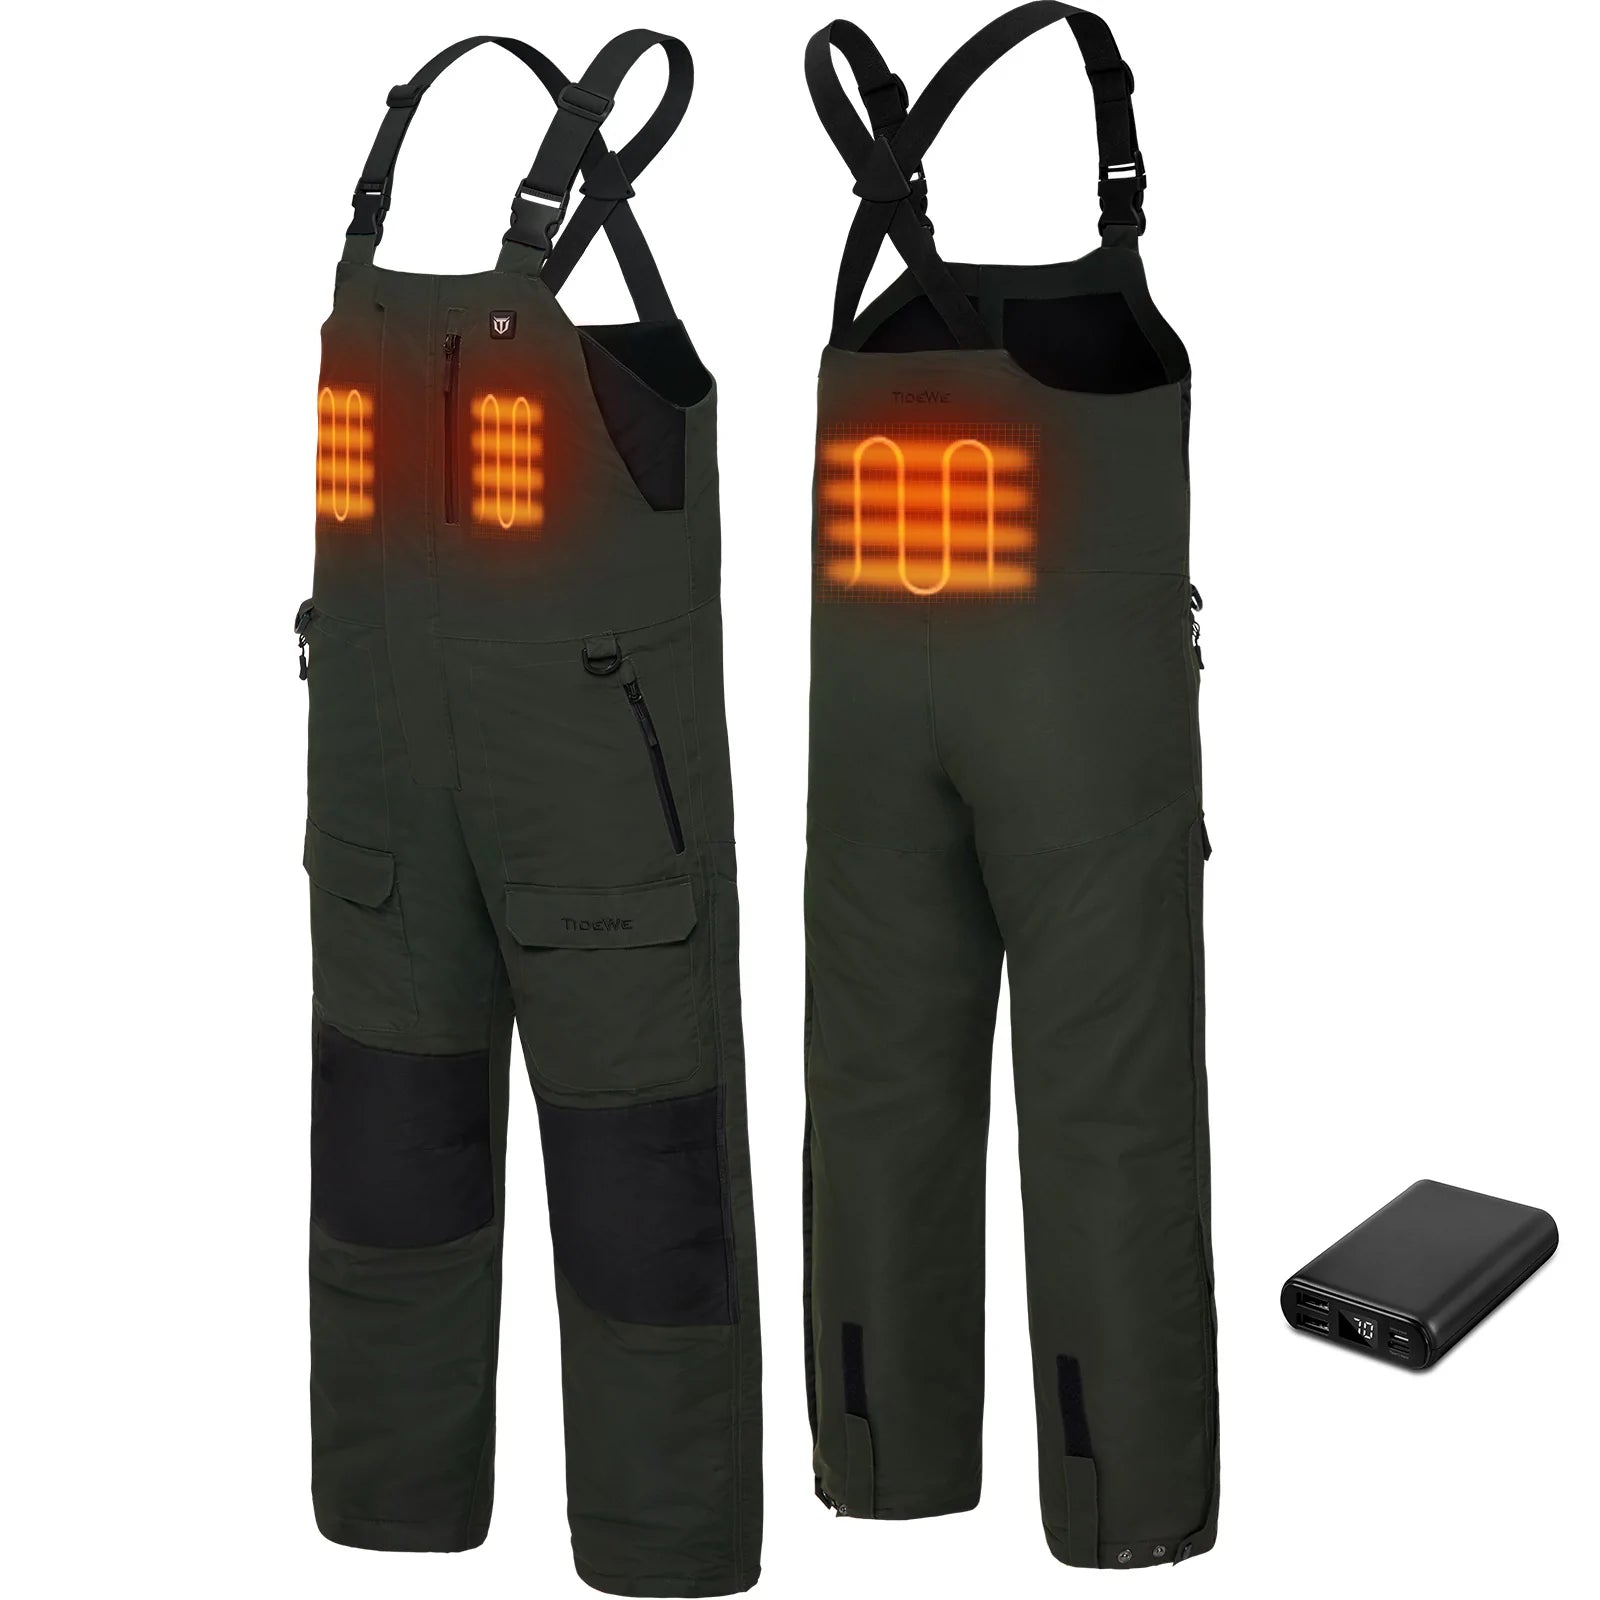 Men’s Insulated Heated Fishing Waterproof Bibs with Battery